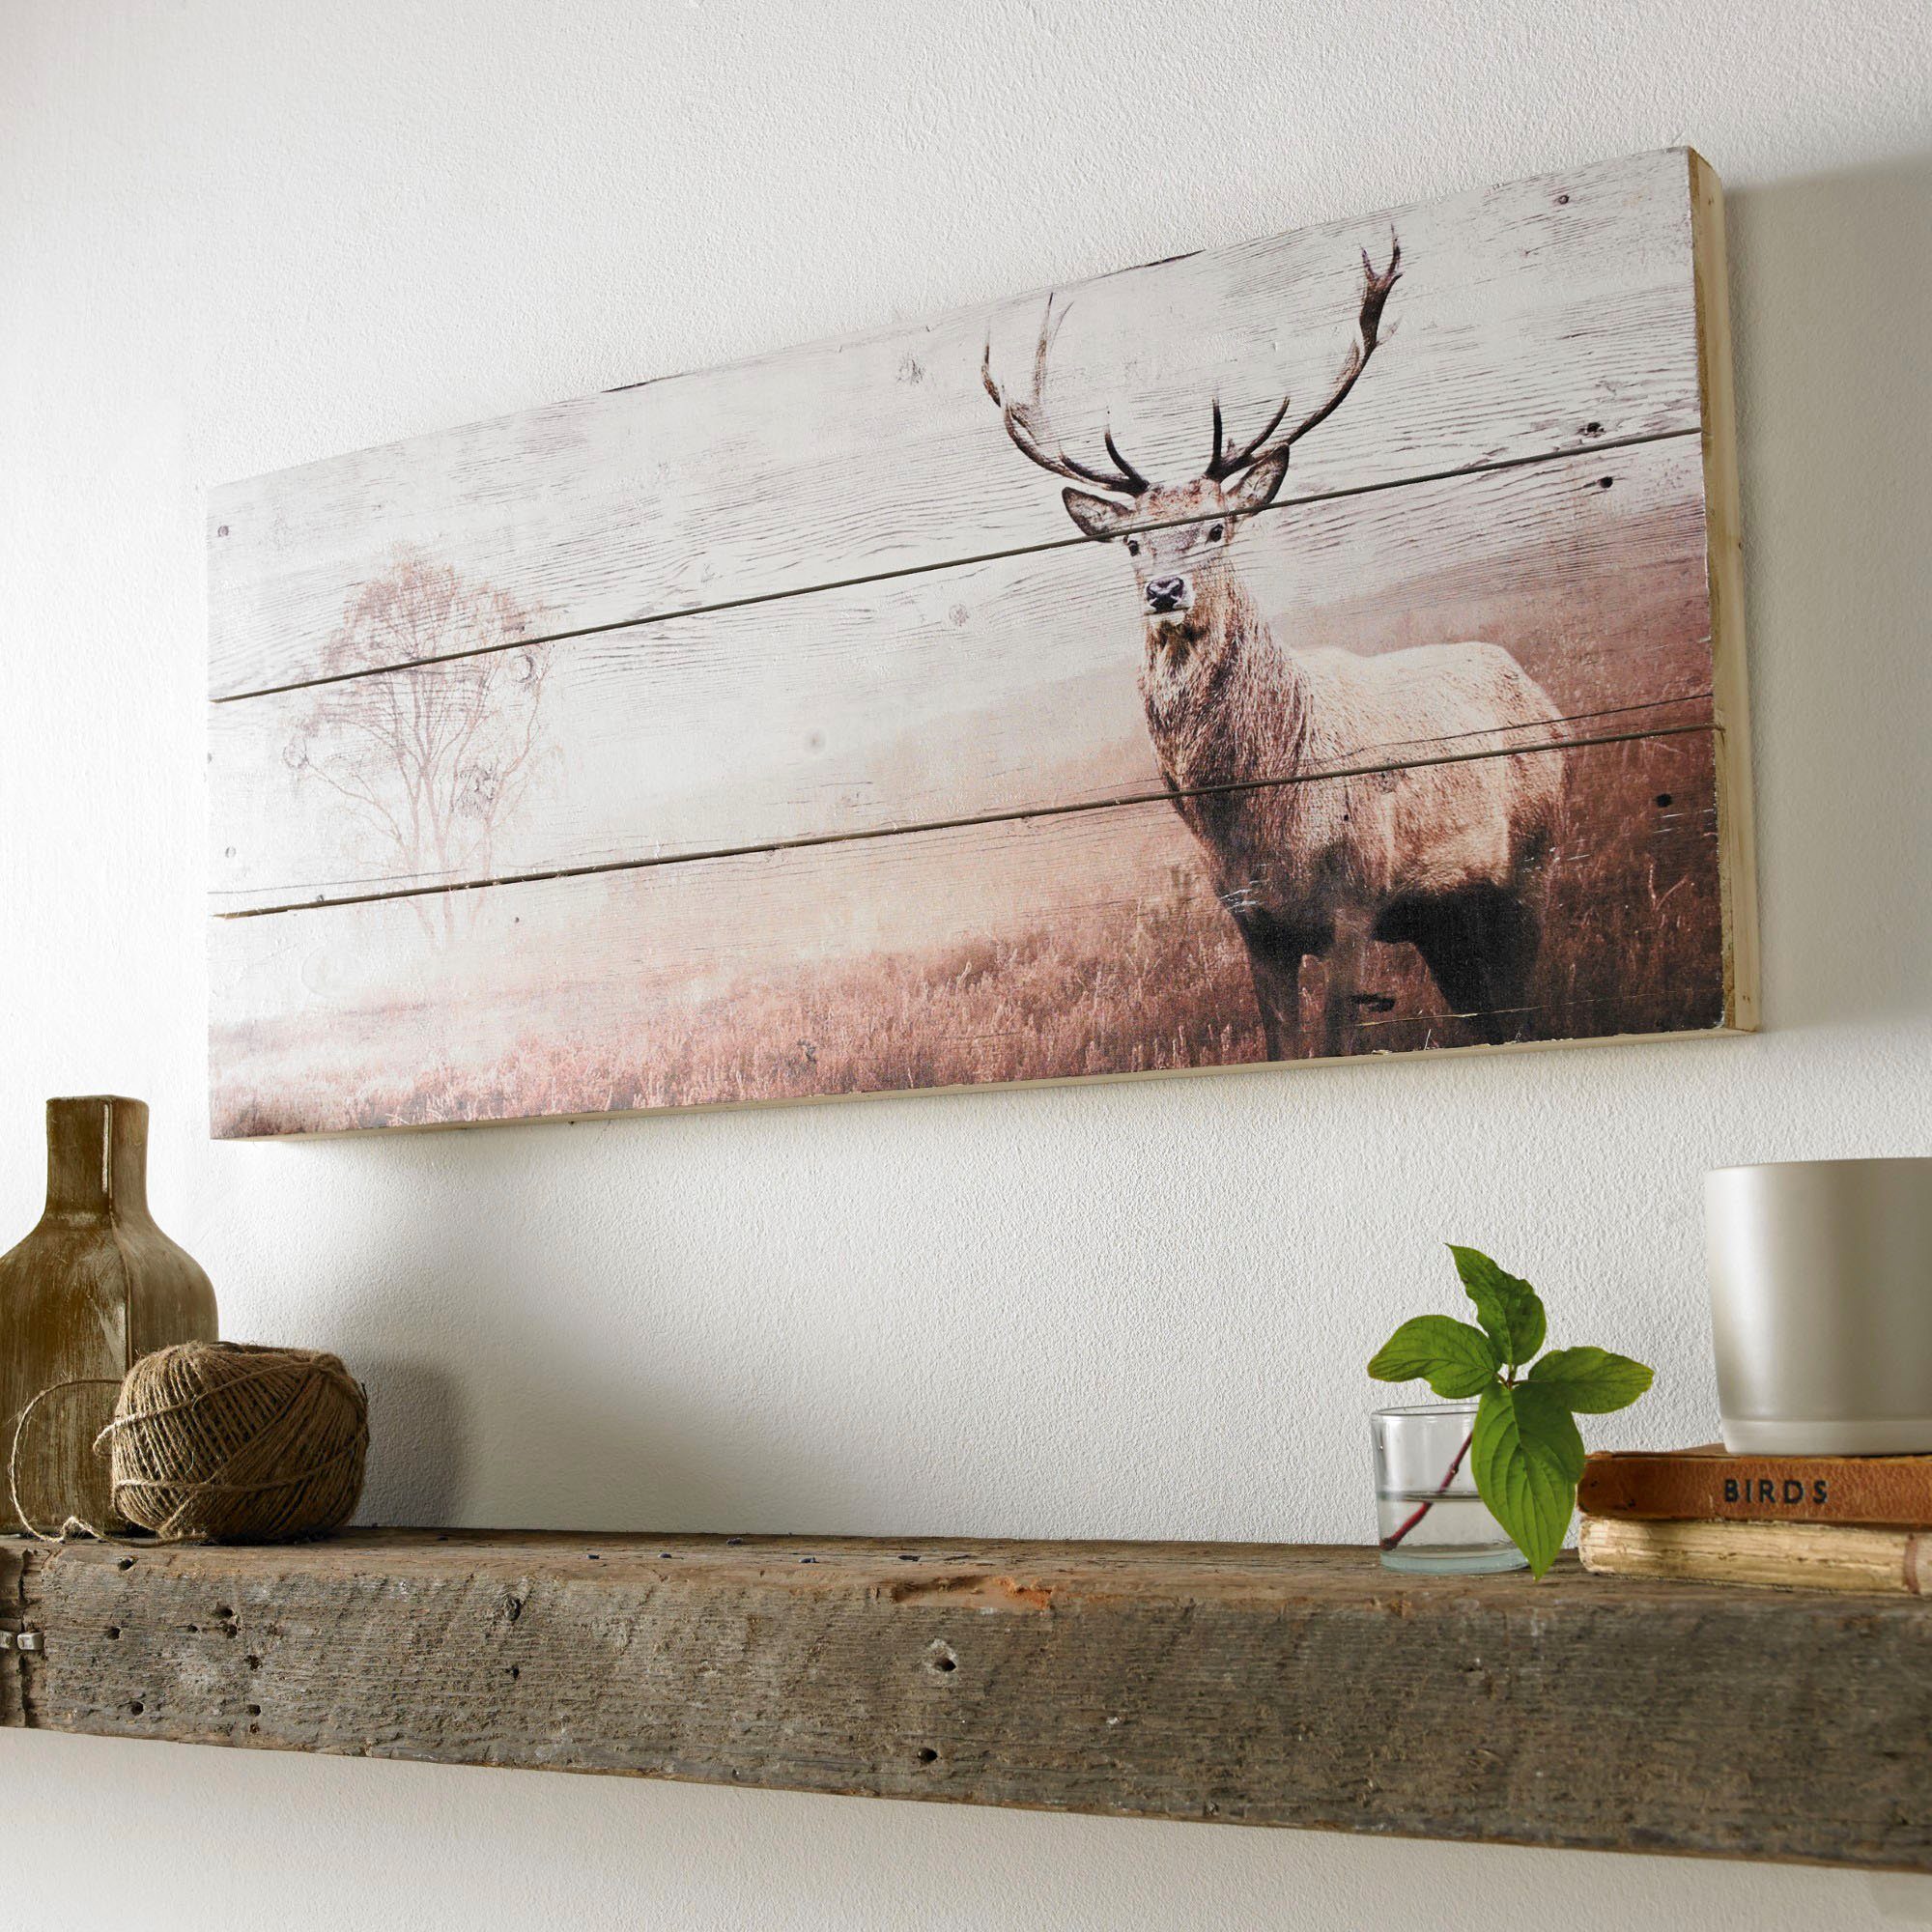 Art for the home Holzbild Stag, Hirsche